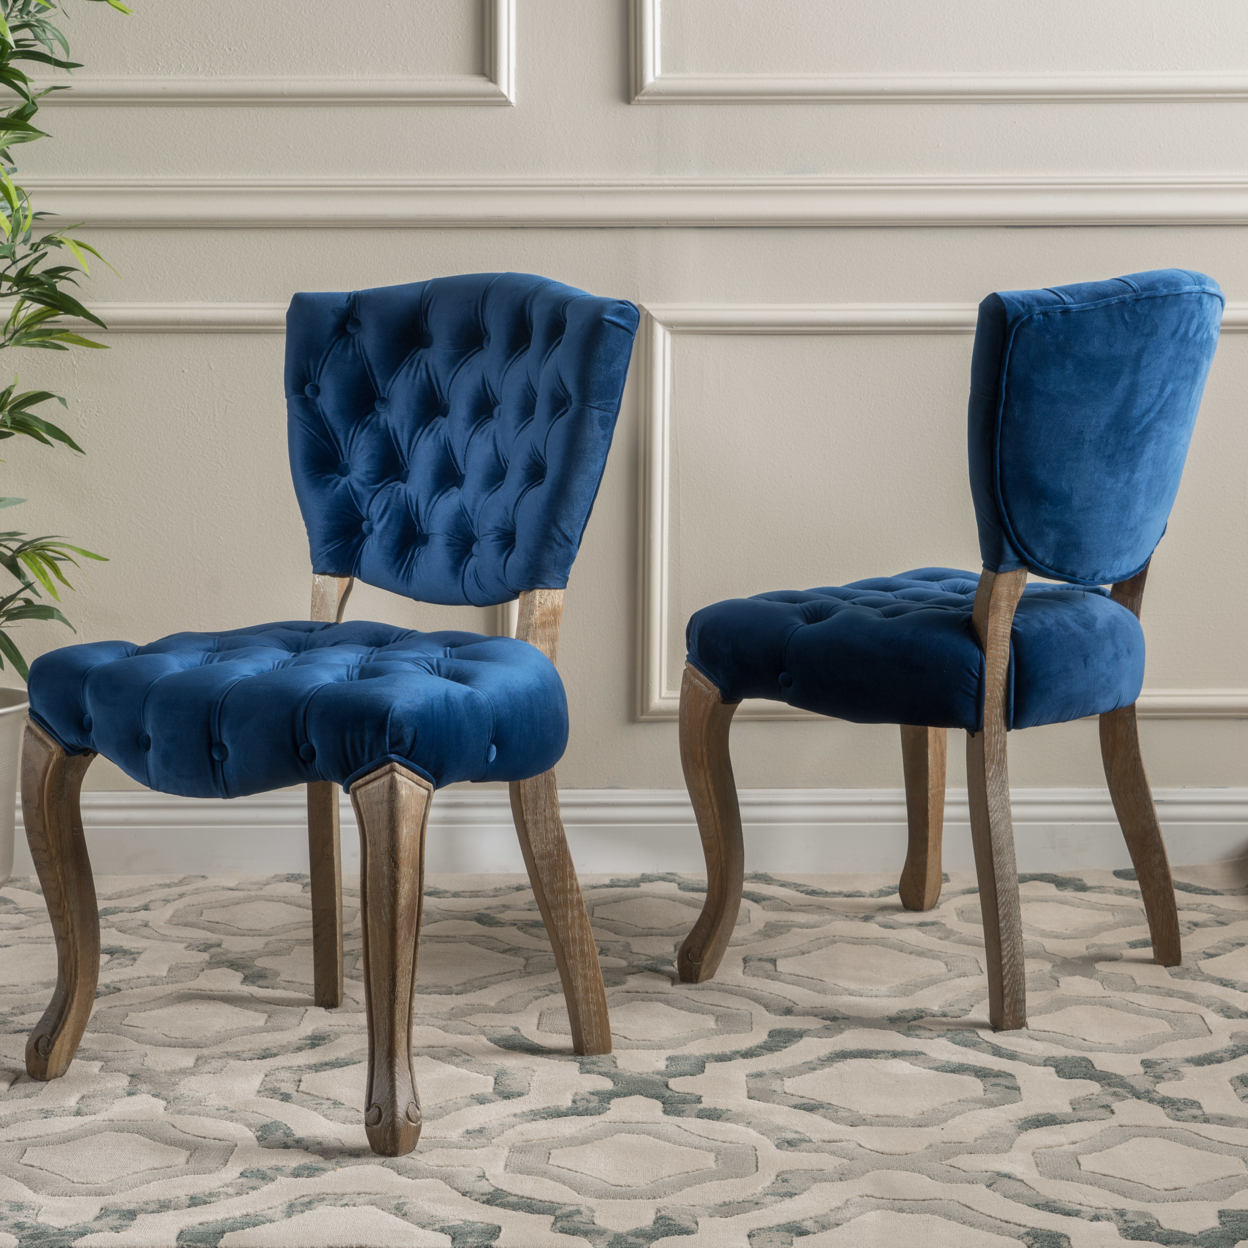 Bates Tufted Velvet Dining Chair With Cabriole Legs (Set Of 2) - Dark Teal Fabric